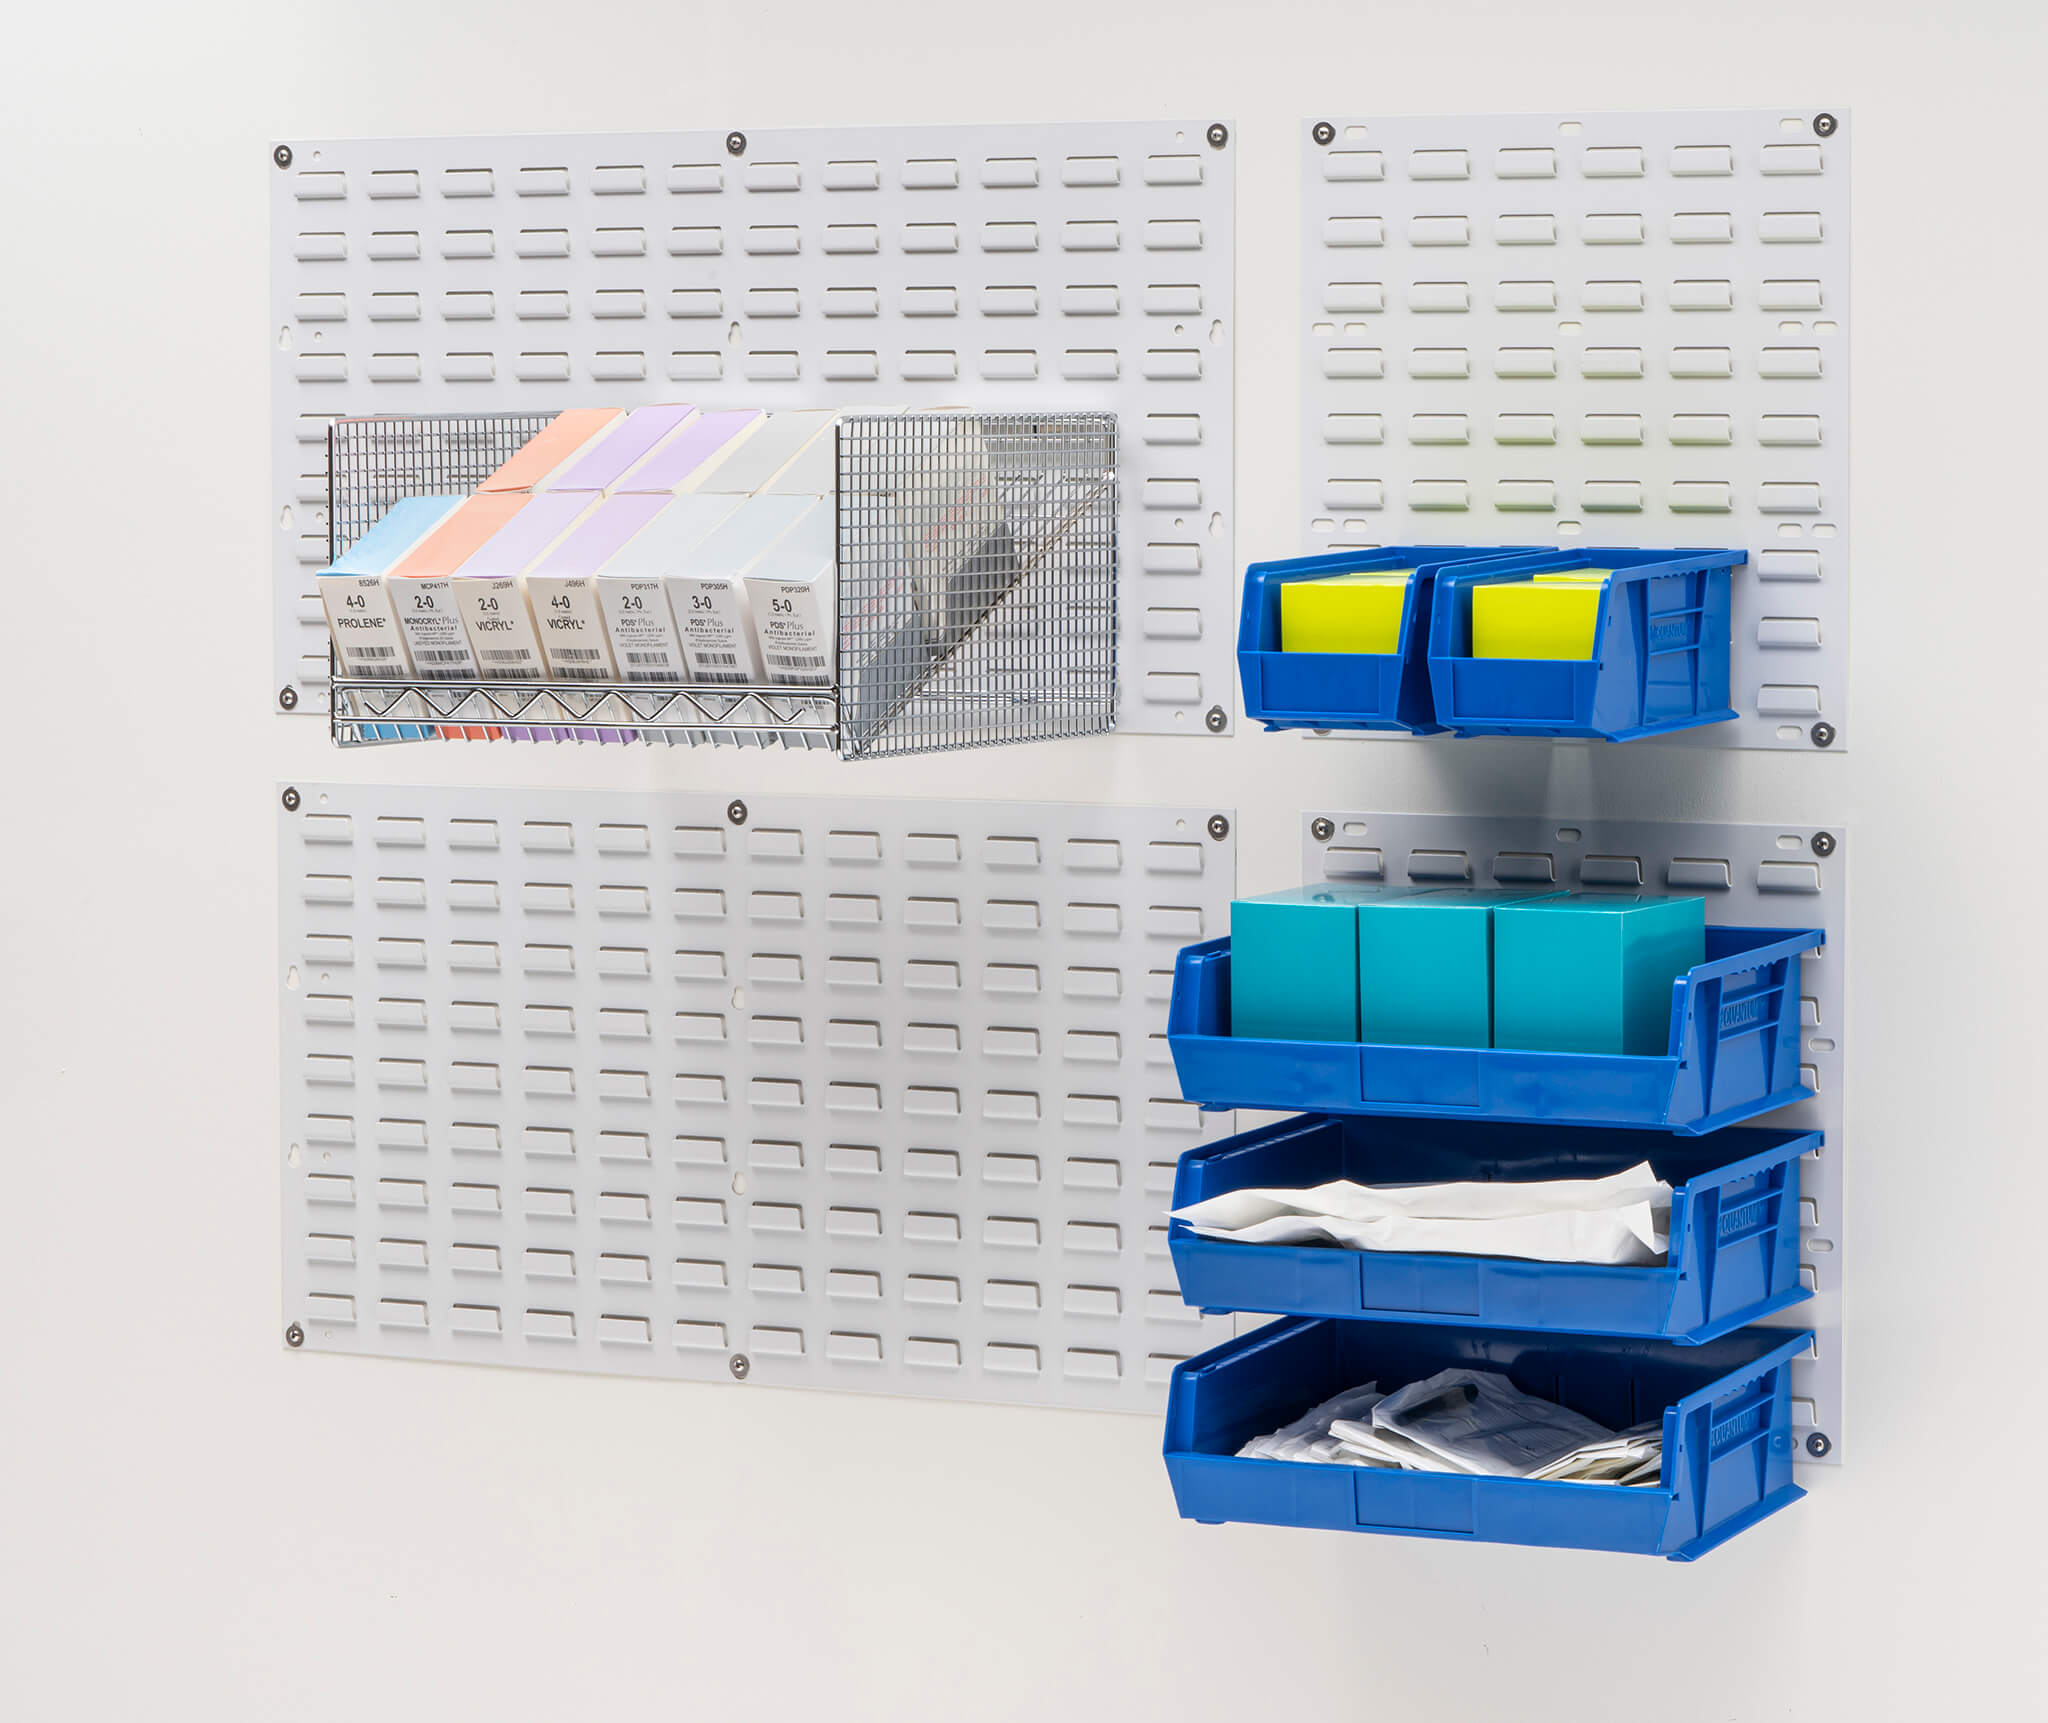 Using Wire Shelving vs Louvered Panels to Organize Storage Bins